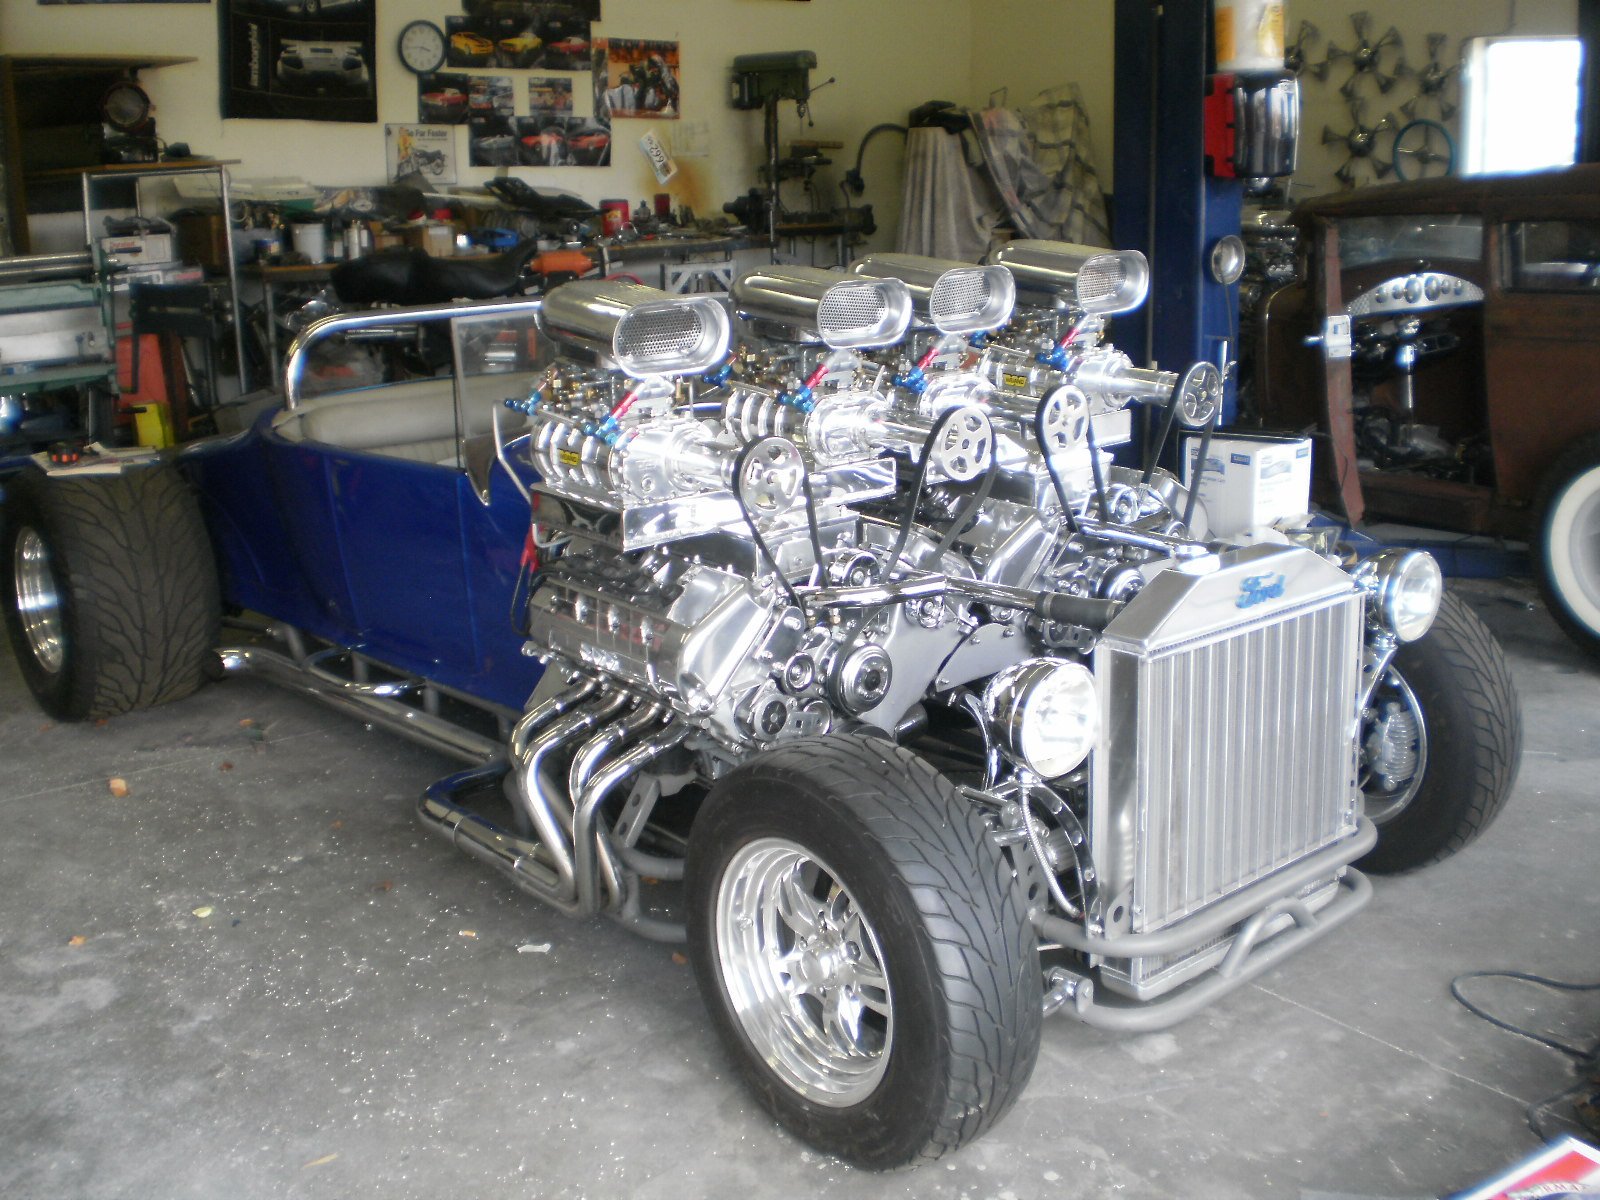 double, Trouble, Hot, Rod, Has, Two, Ford, Racing, Engine, Rods, Ford, Model t, Blower, Retro Wallpaper